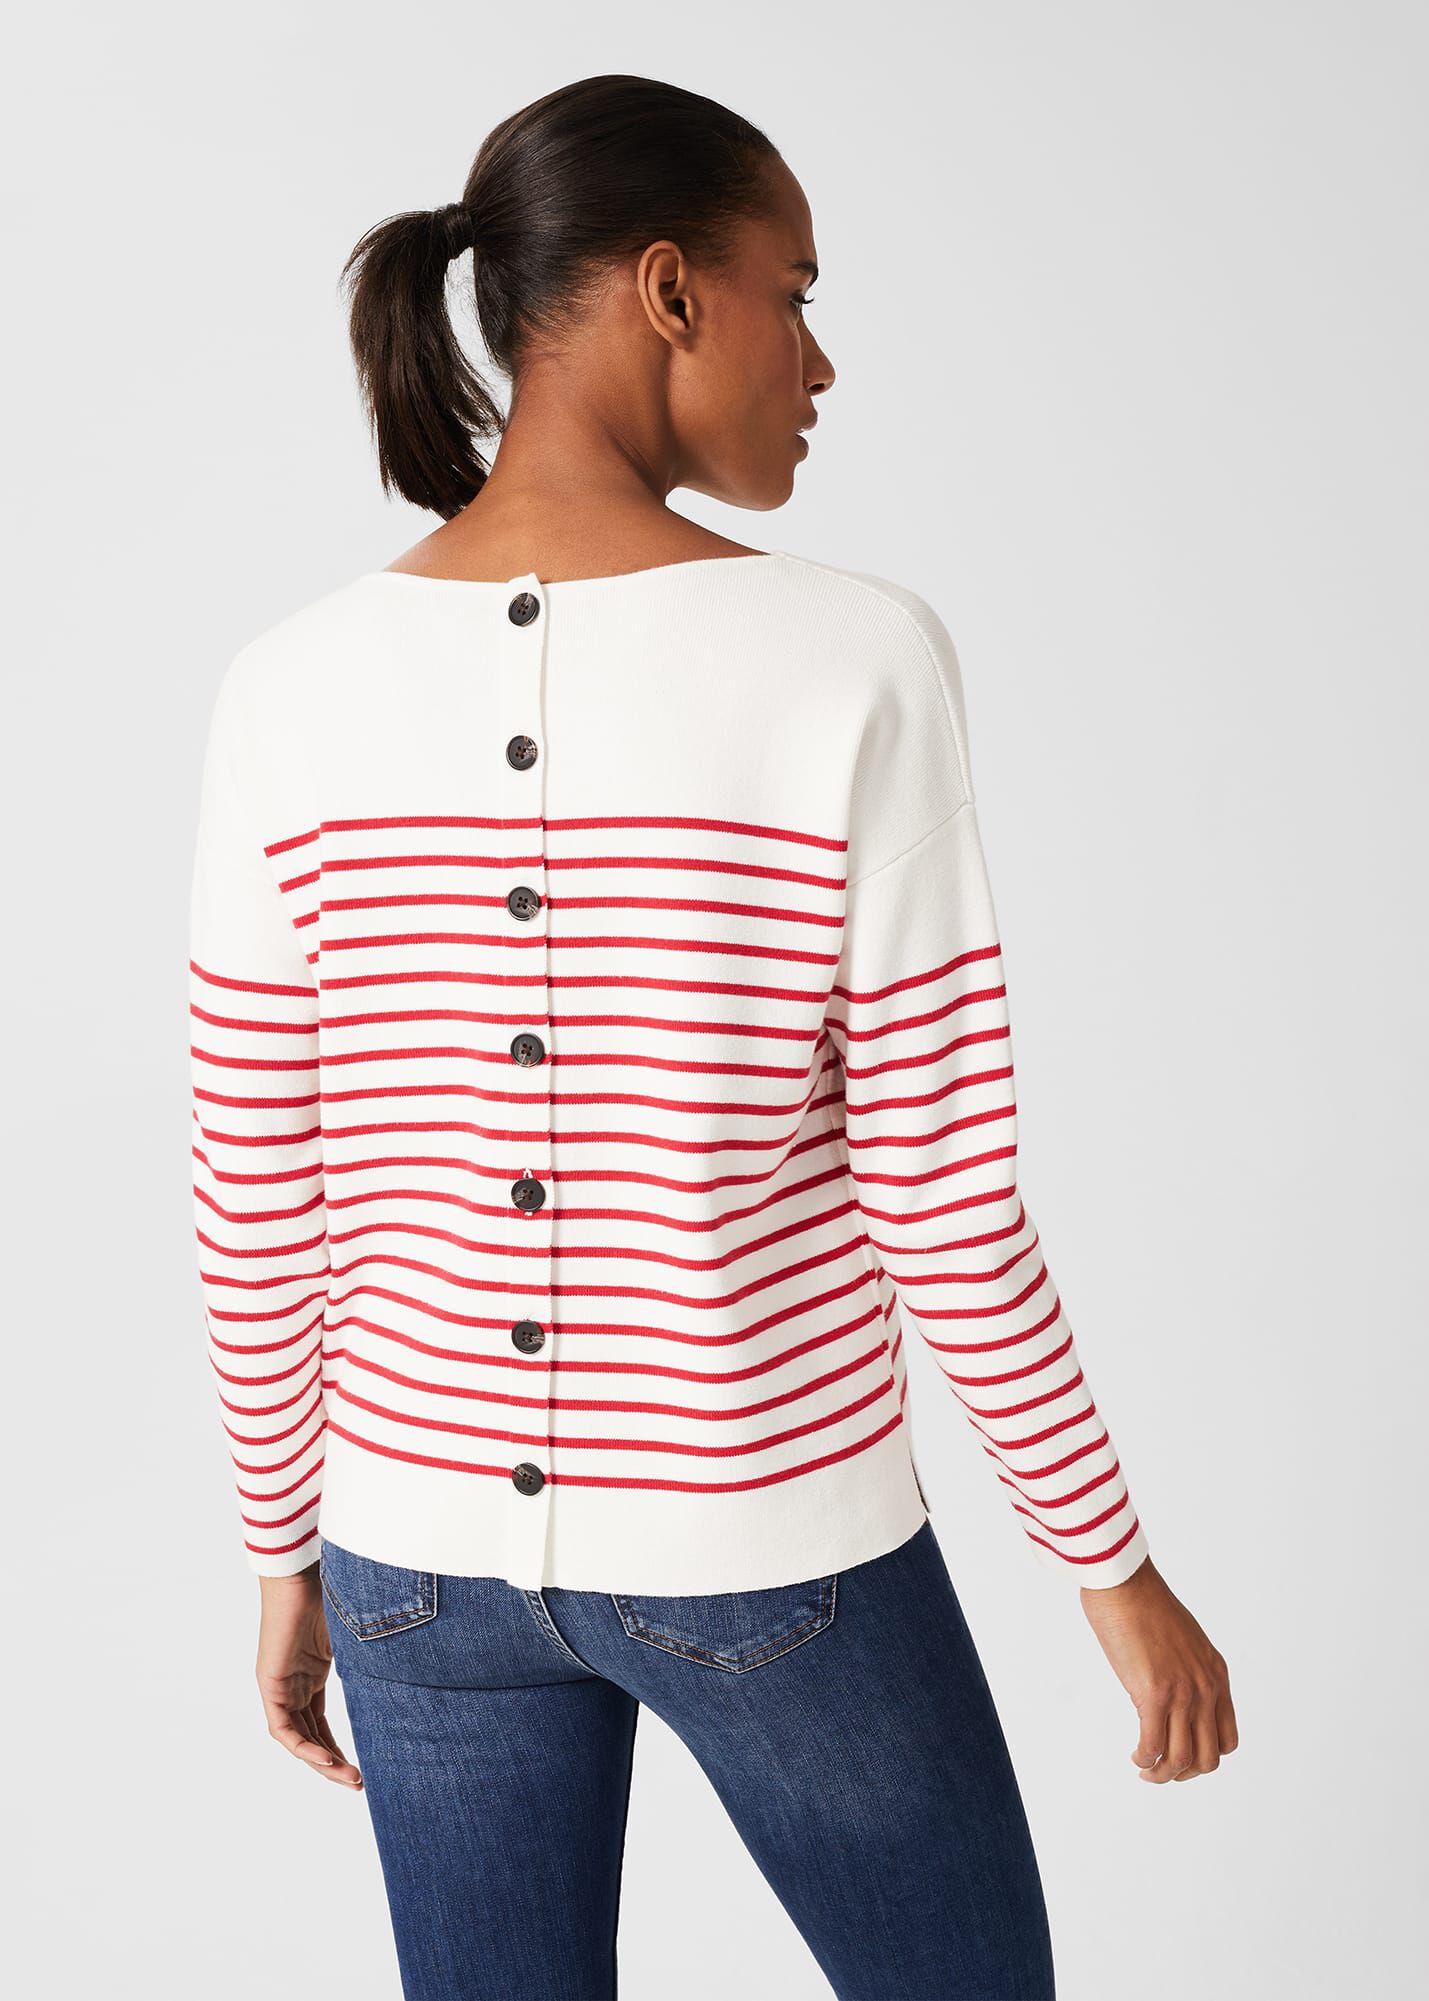 Womens Clothing Jumpers and knitwear Jumpers Hobbs Cotton Petra Striped Jumper in Ivory Red Red 